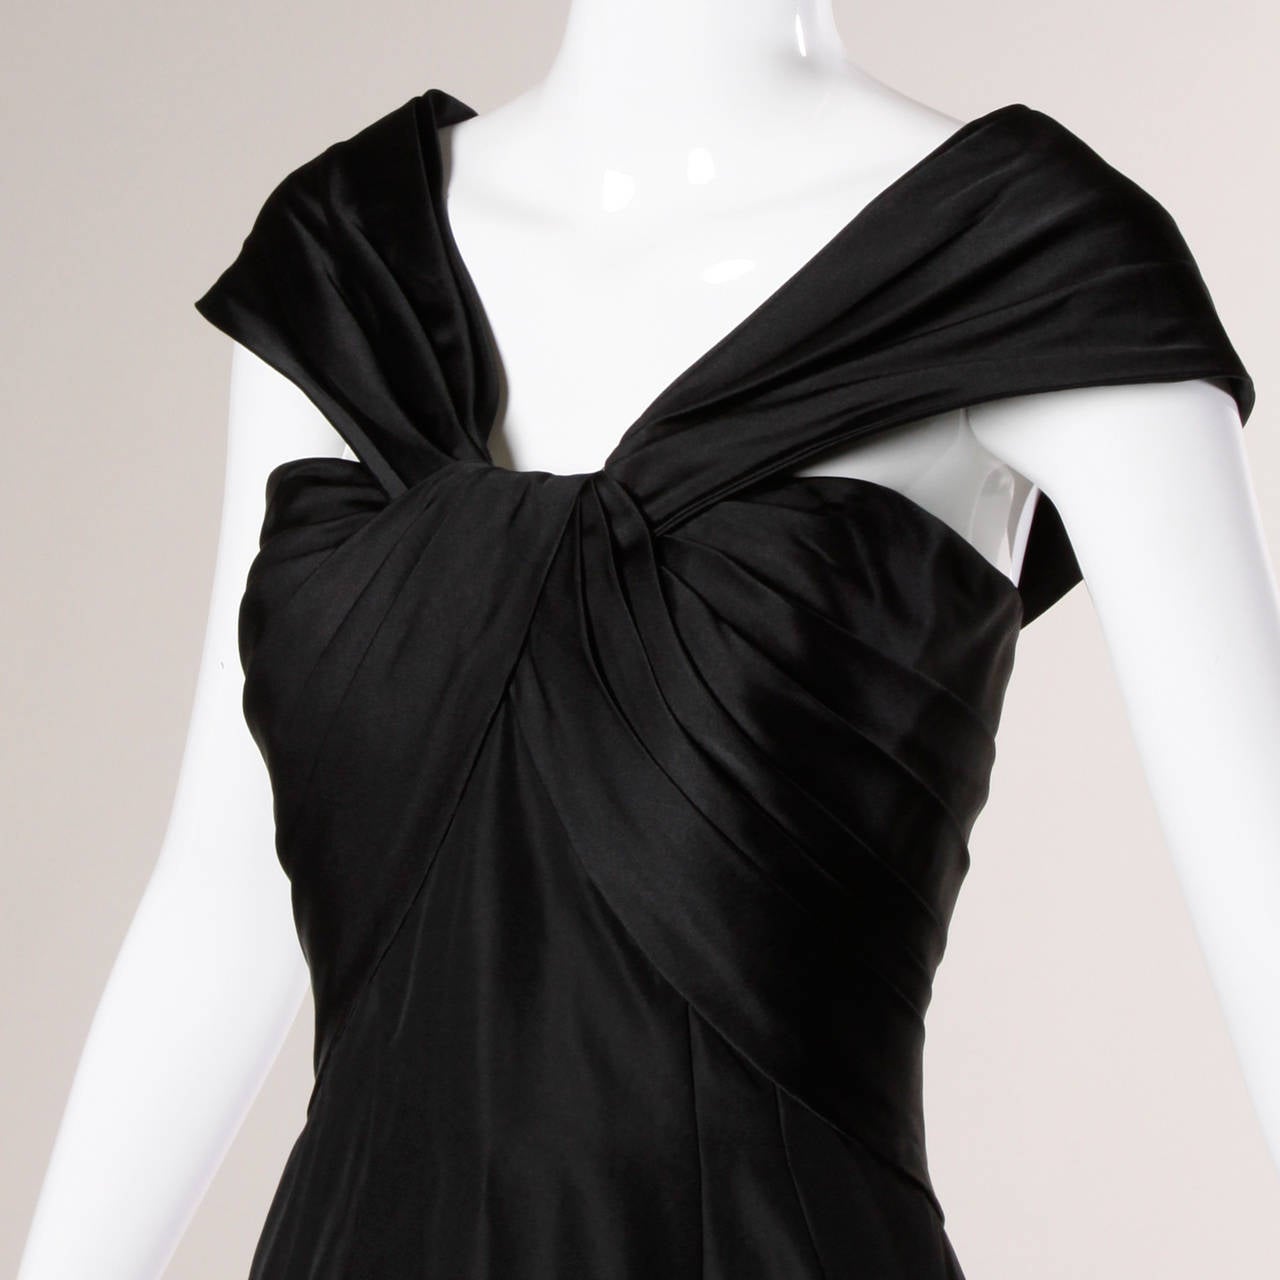 Beautifully constructed vintage 50s or 60s cocktail dress with couture detailing and waist stay. Very well made!

Details:

Fully Lined
Back Metal Zip and Hook Closure
Marked Size: Not Marked
Estimated Size: Small
Color: Black
Label: Not